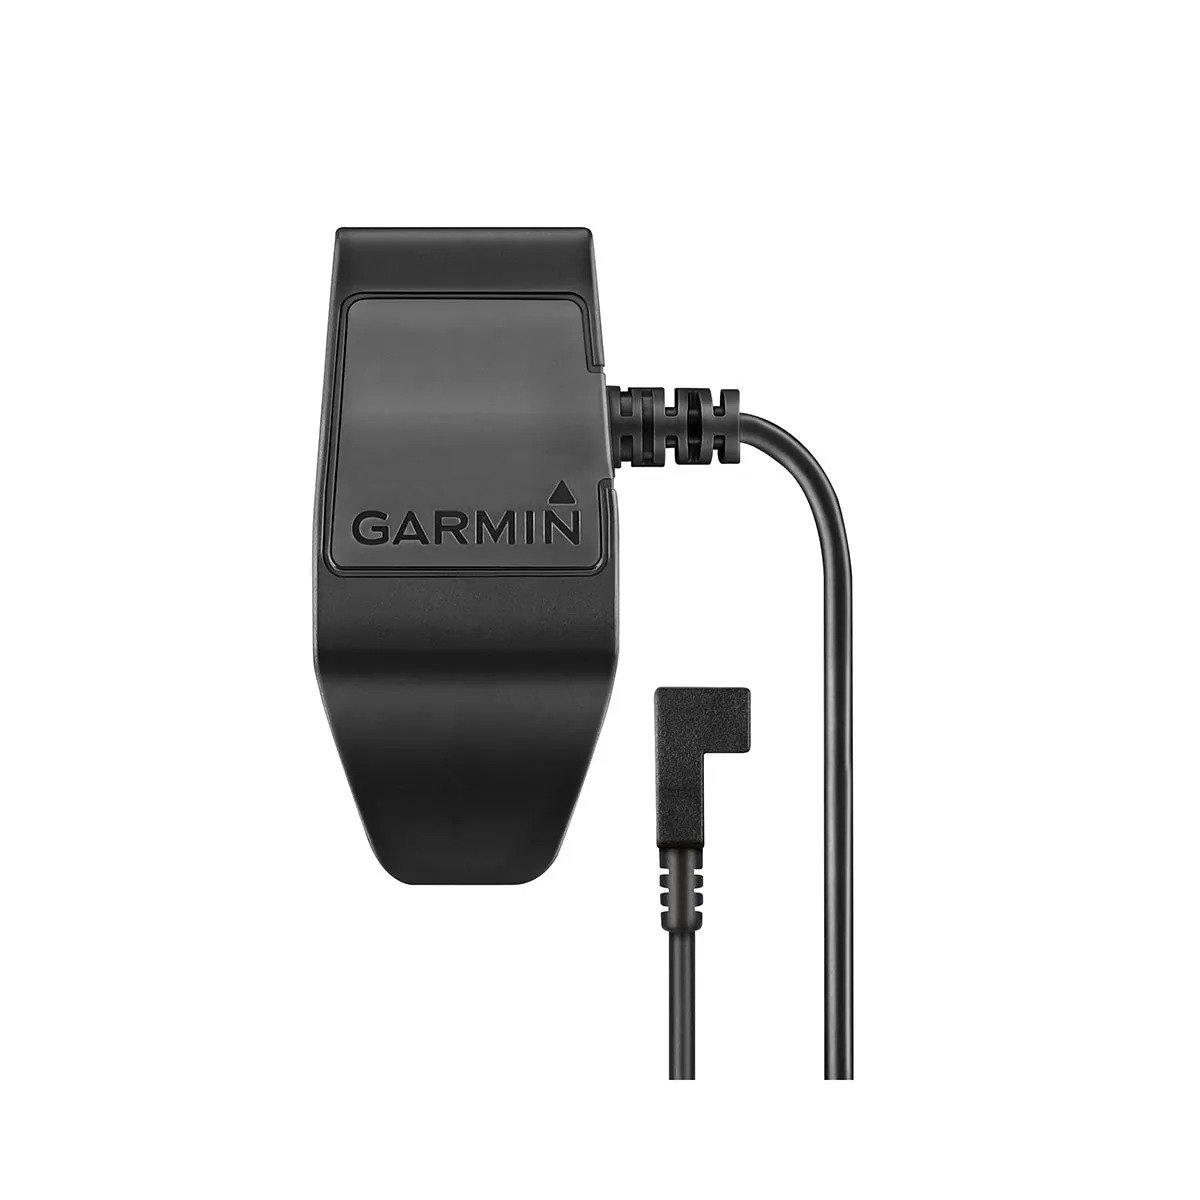 Garmin Charging Cable for TT15/T5 Dog Devices